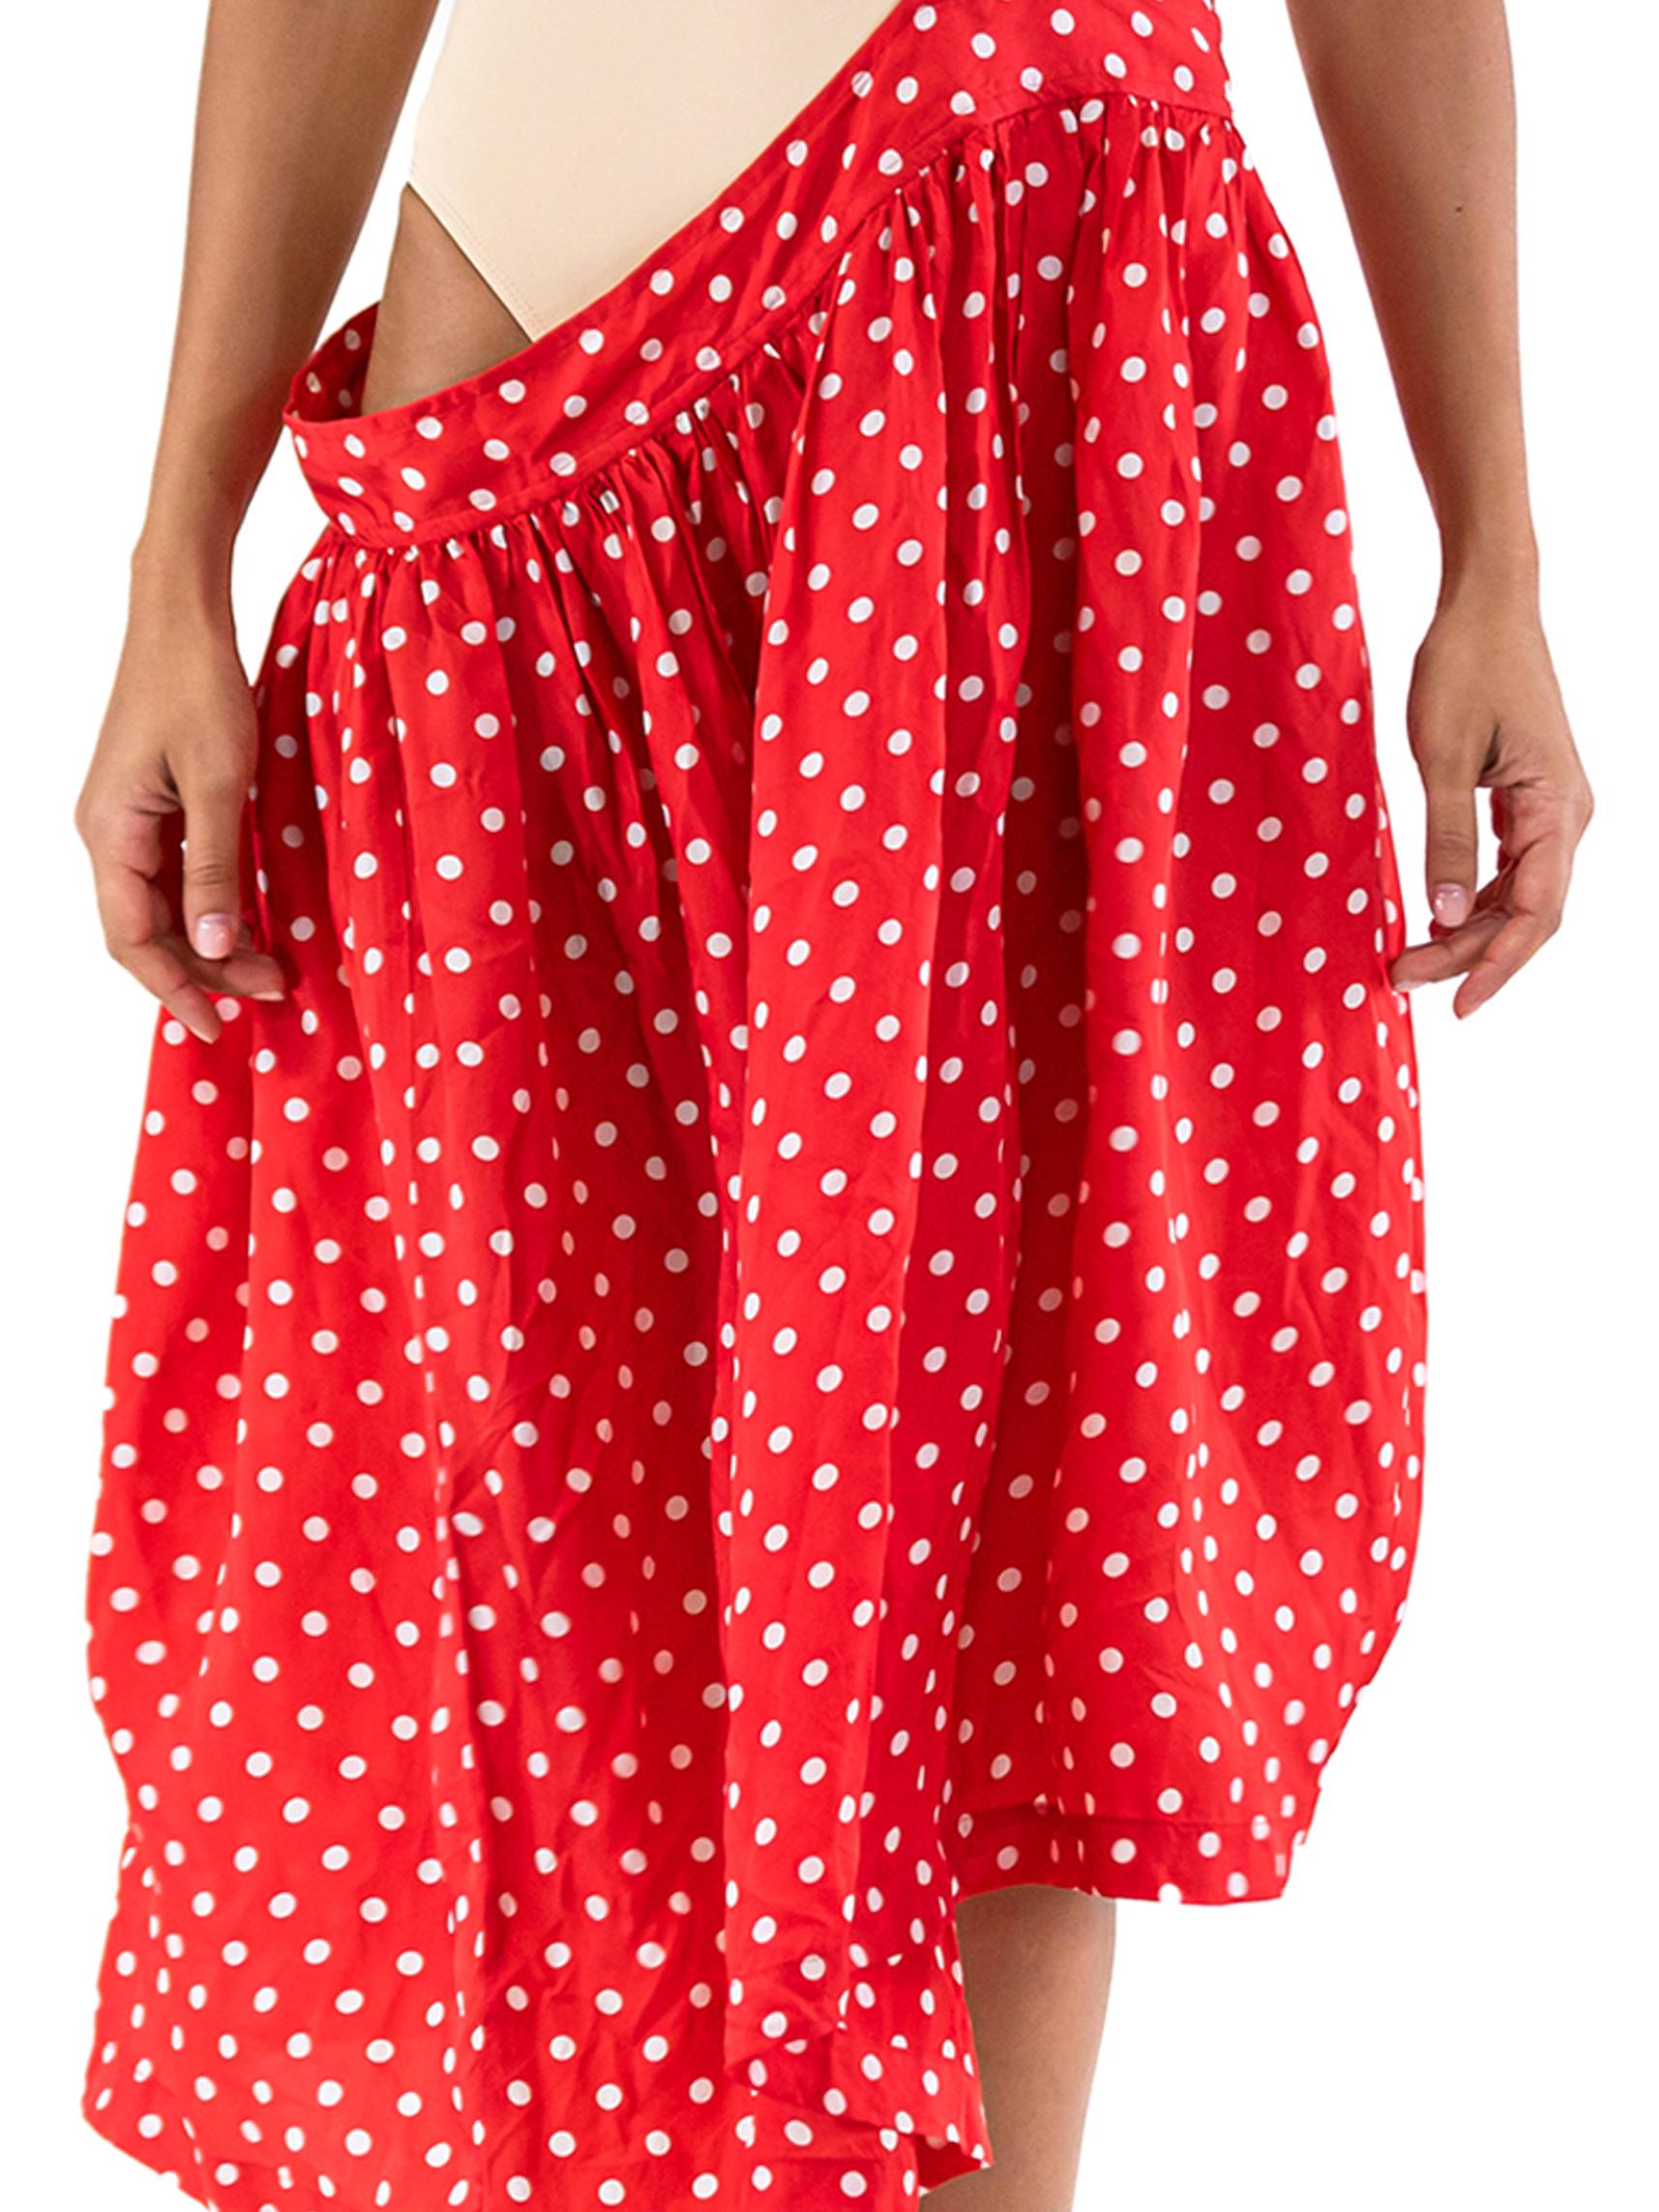 2000S COMME DES GARCONS Red & White Rayon Polka Dot Skirt For Sale 4